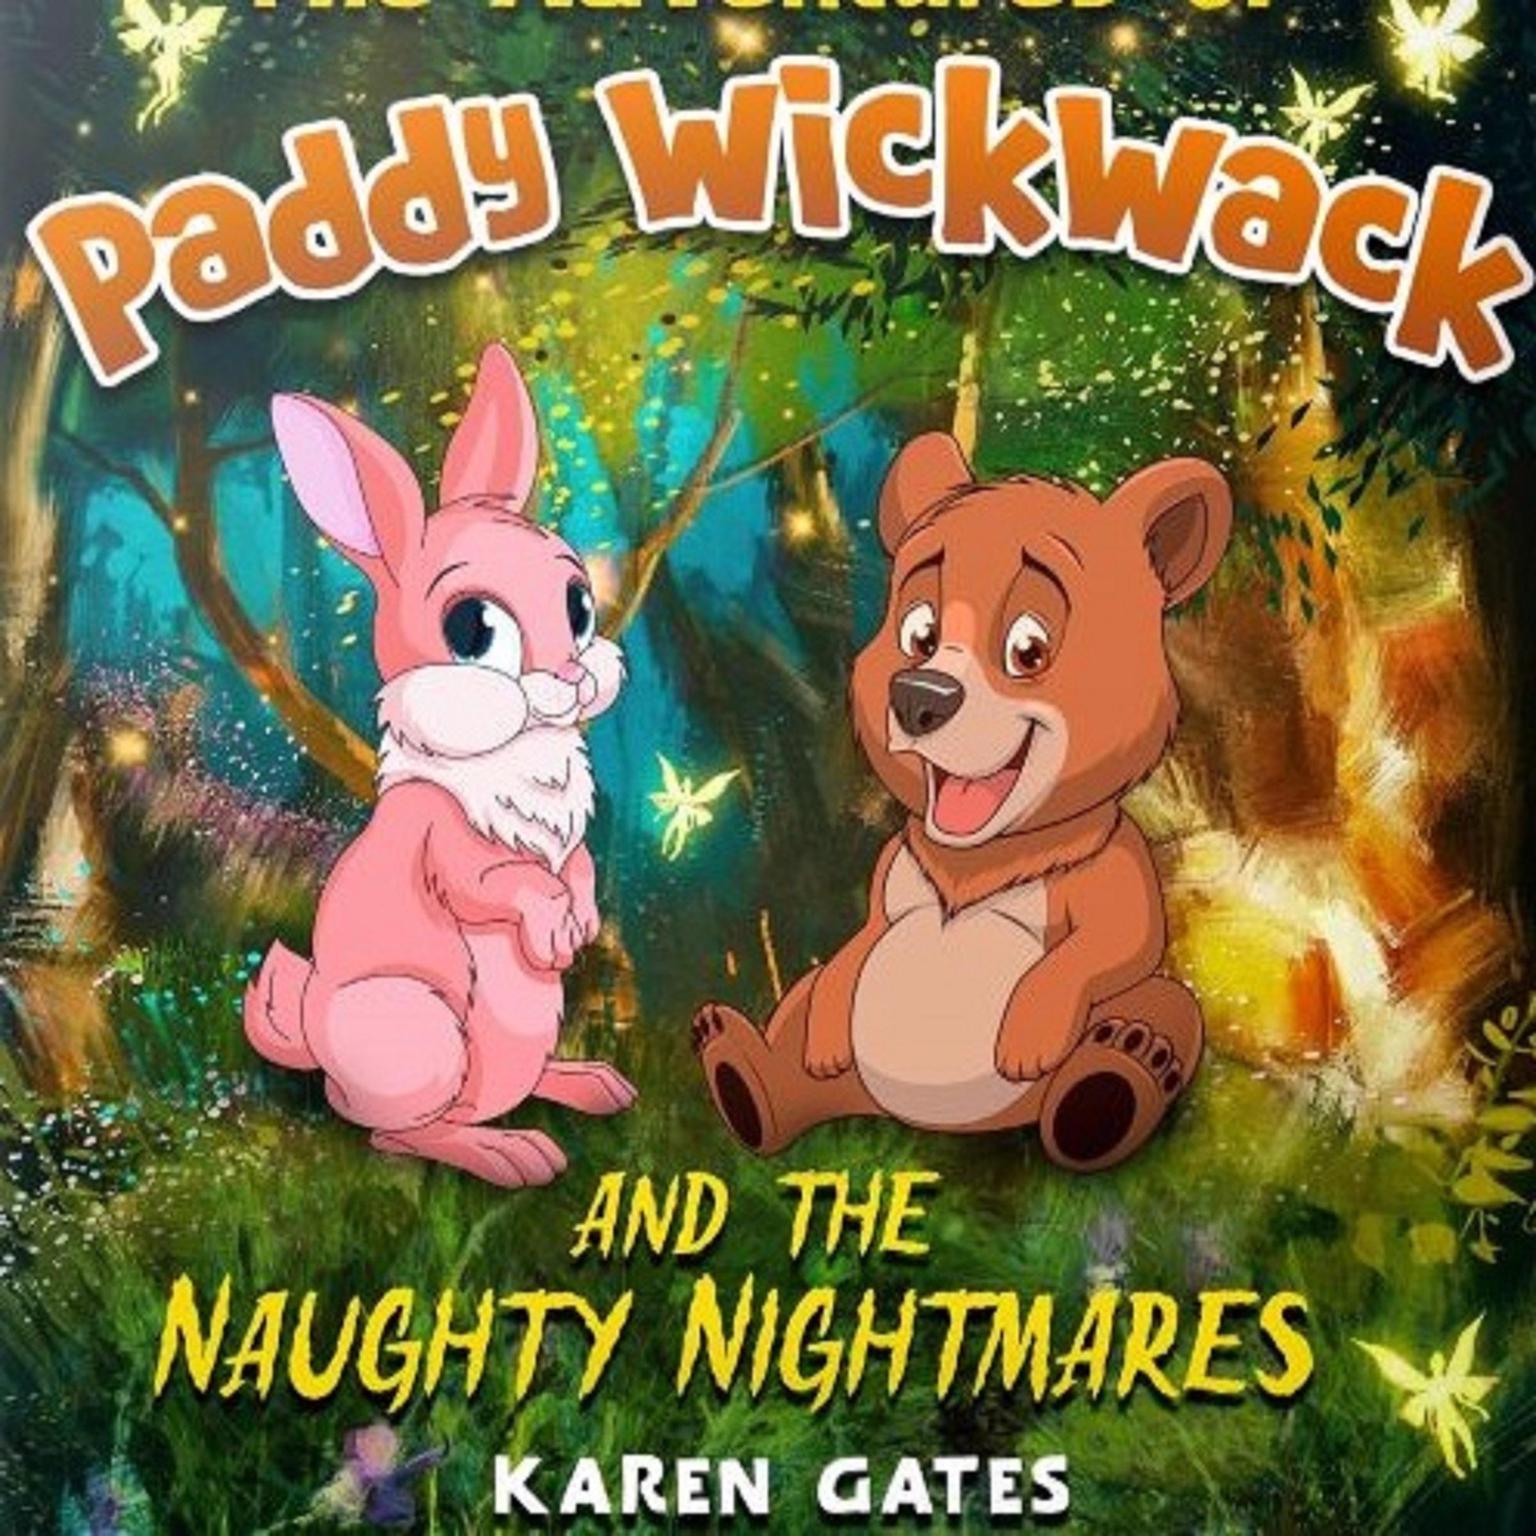 Paddy WickWack and the Naughty Nightmares Audiobook, by Karen Gates